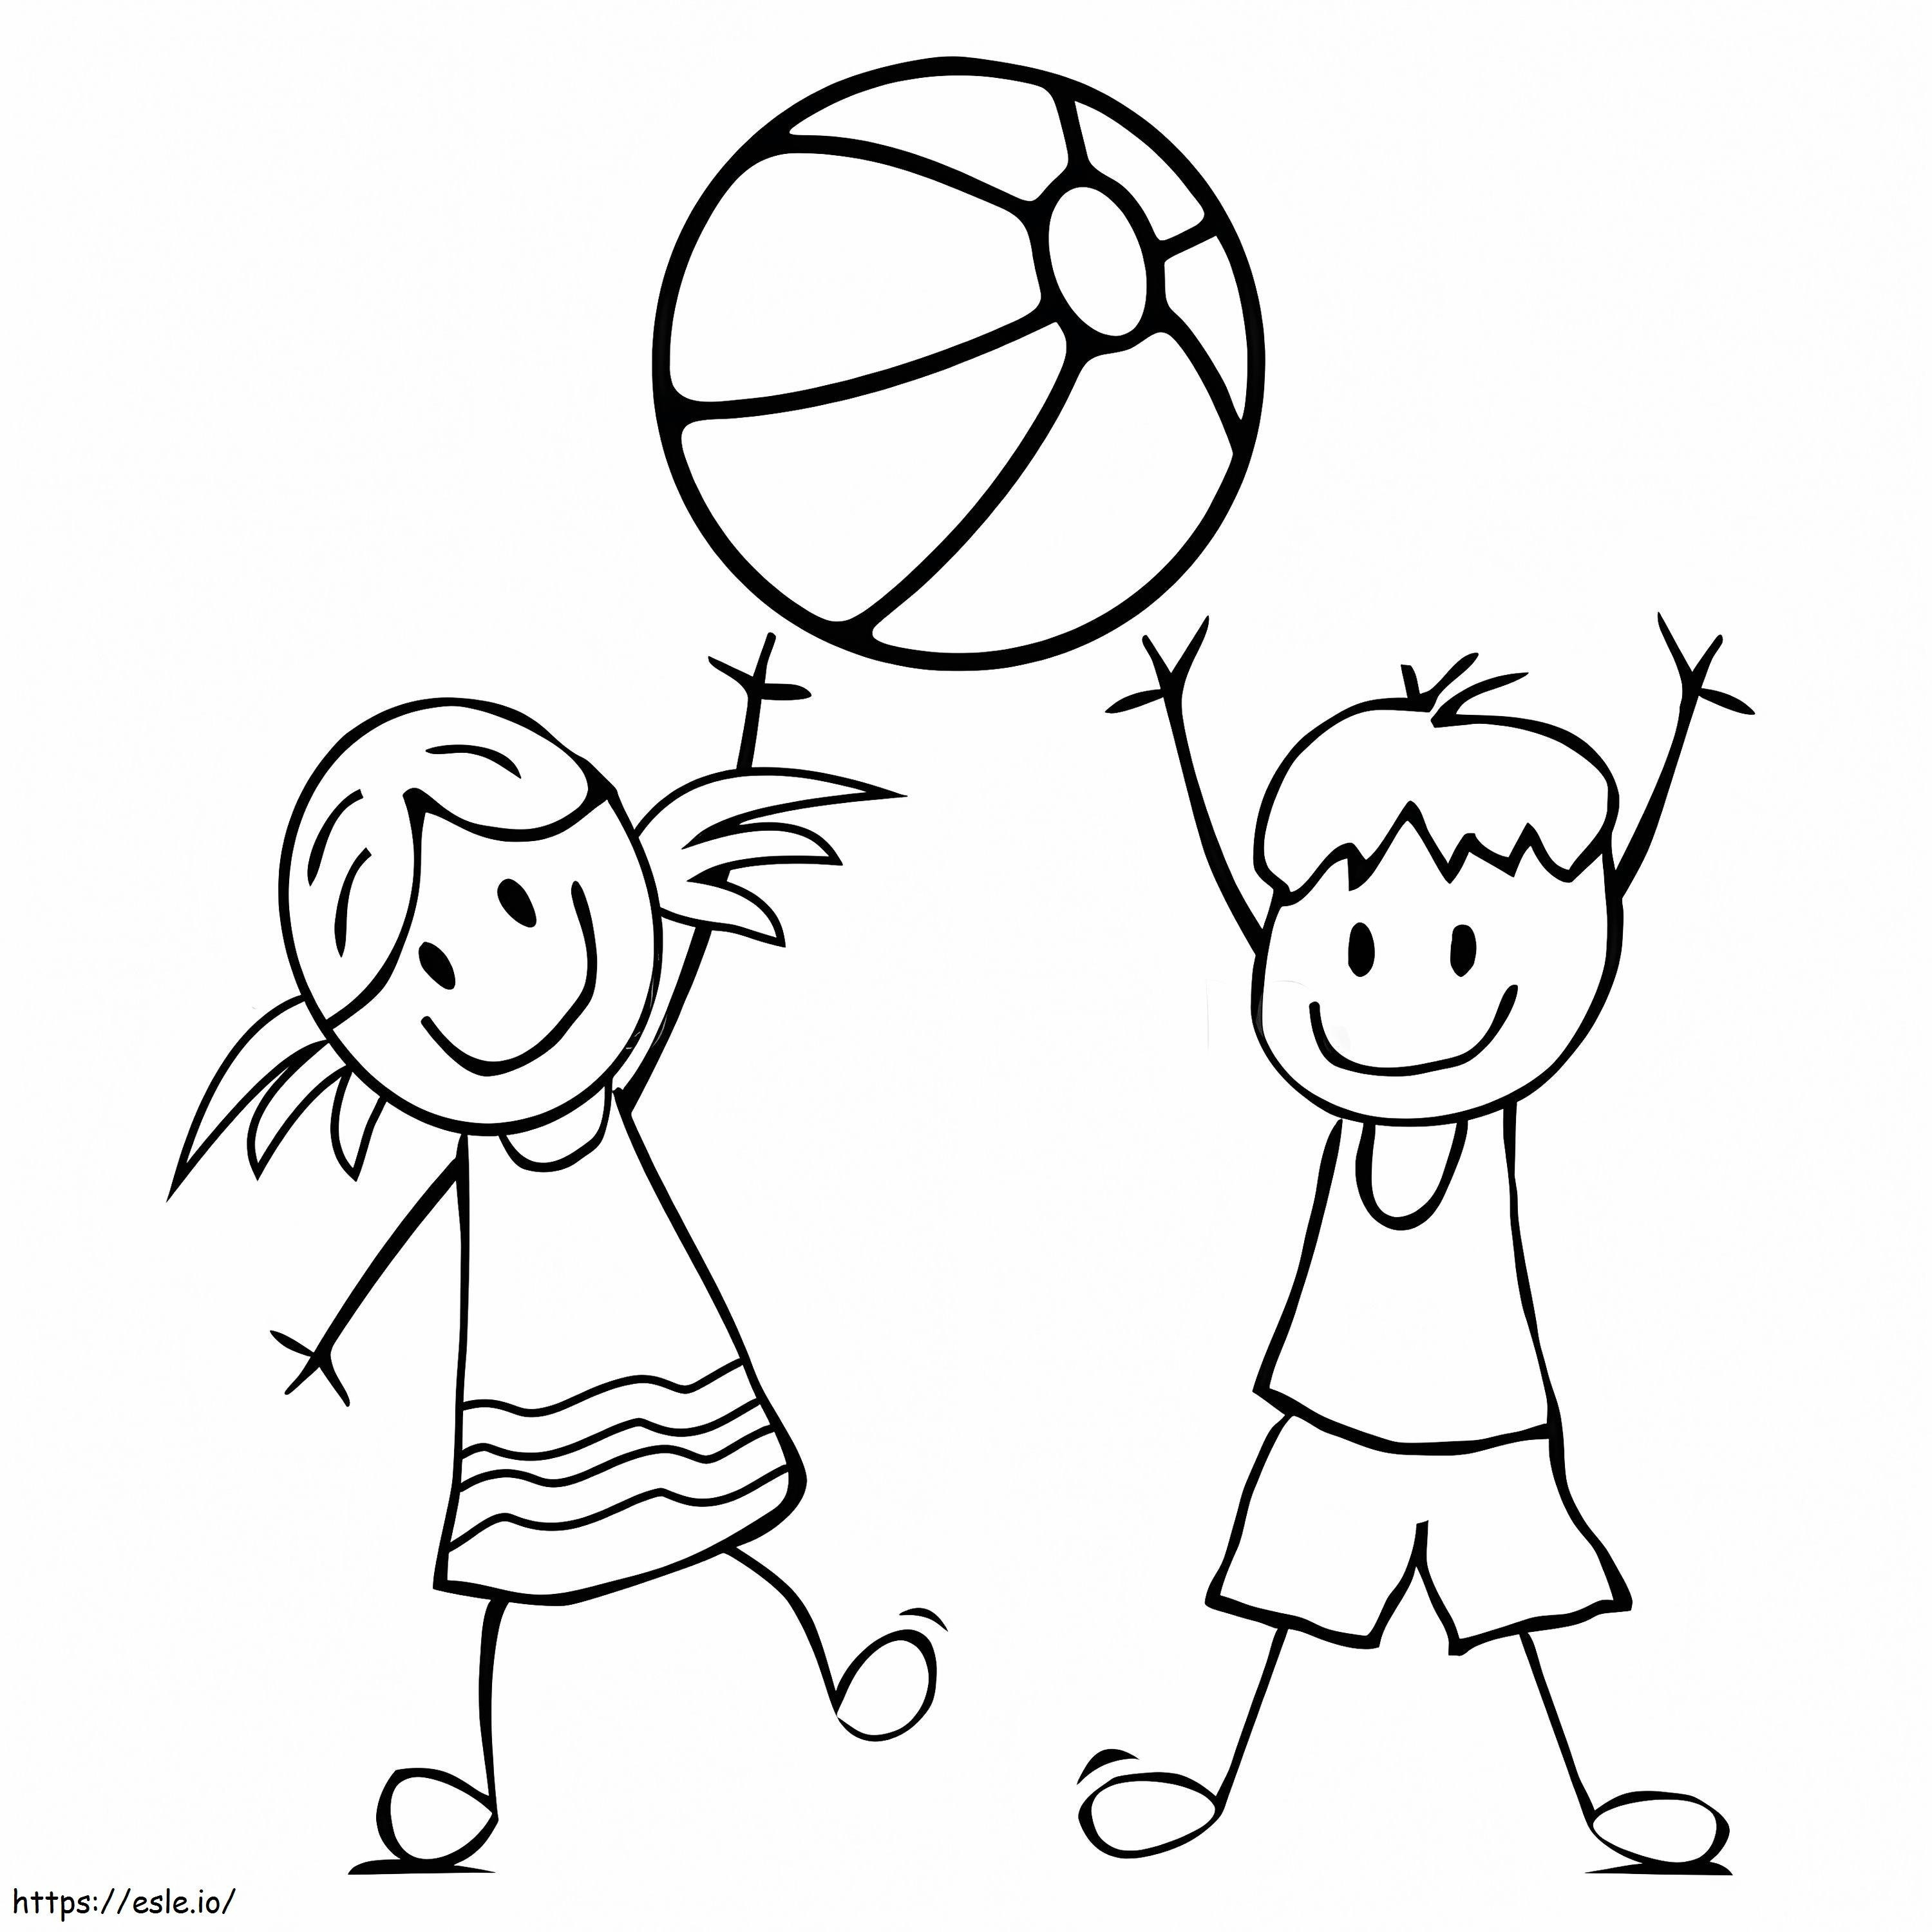 Kids And Beach Ball coloring page